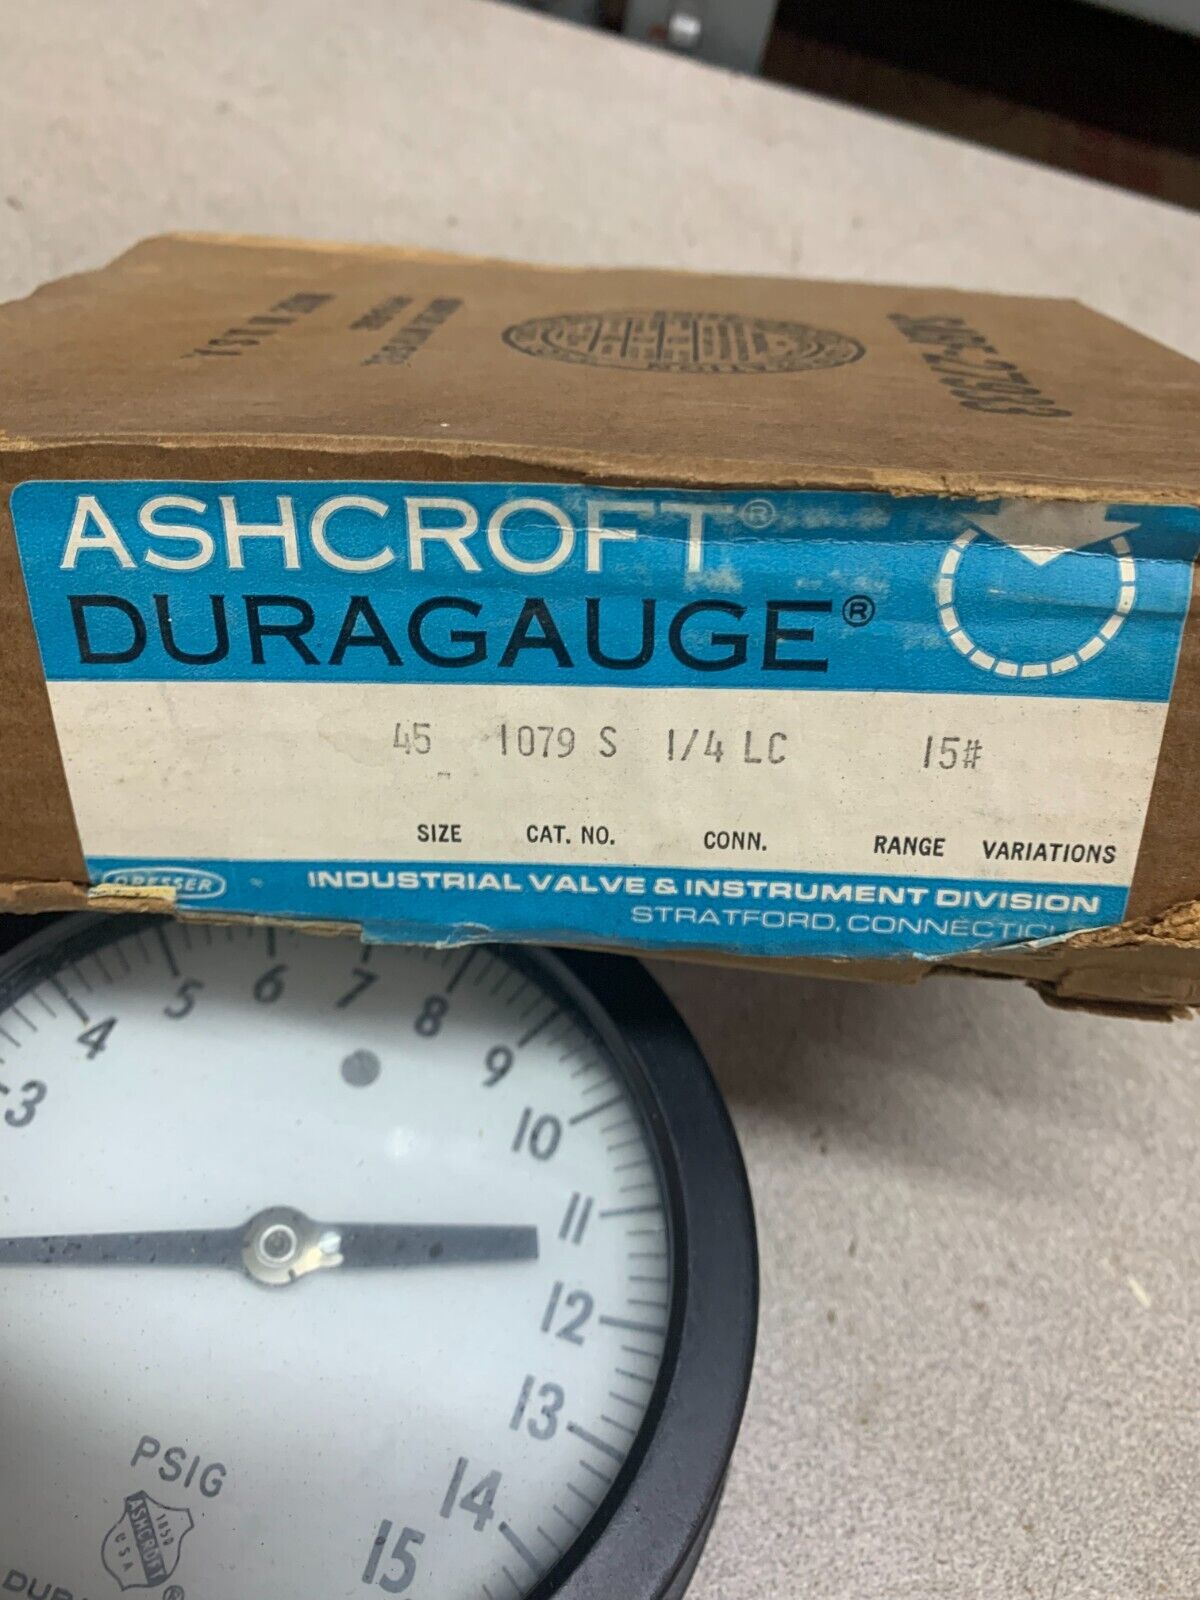 BNEW IN BOX ASHCROFT DURAGAUGE SIZE 45 1079 S 1/4" LC 15#